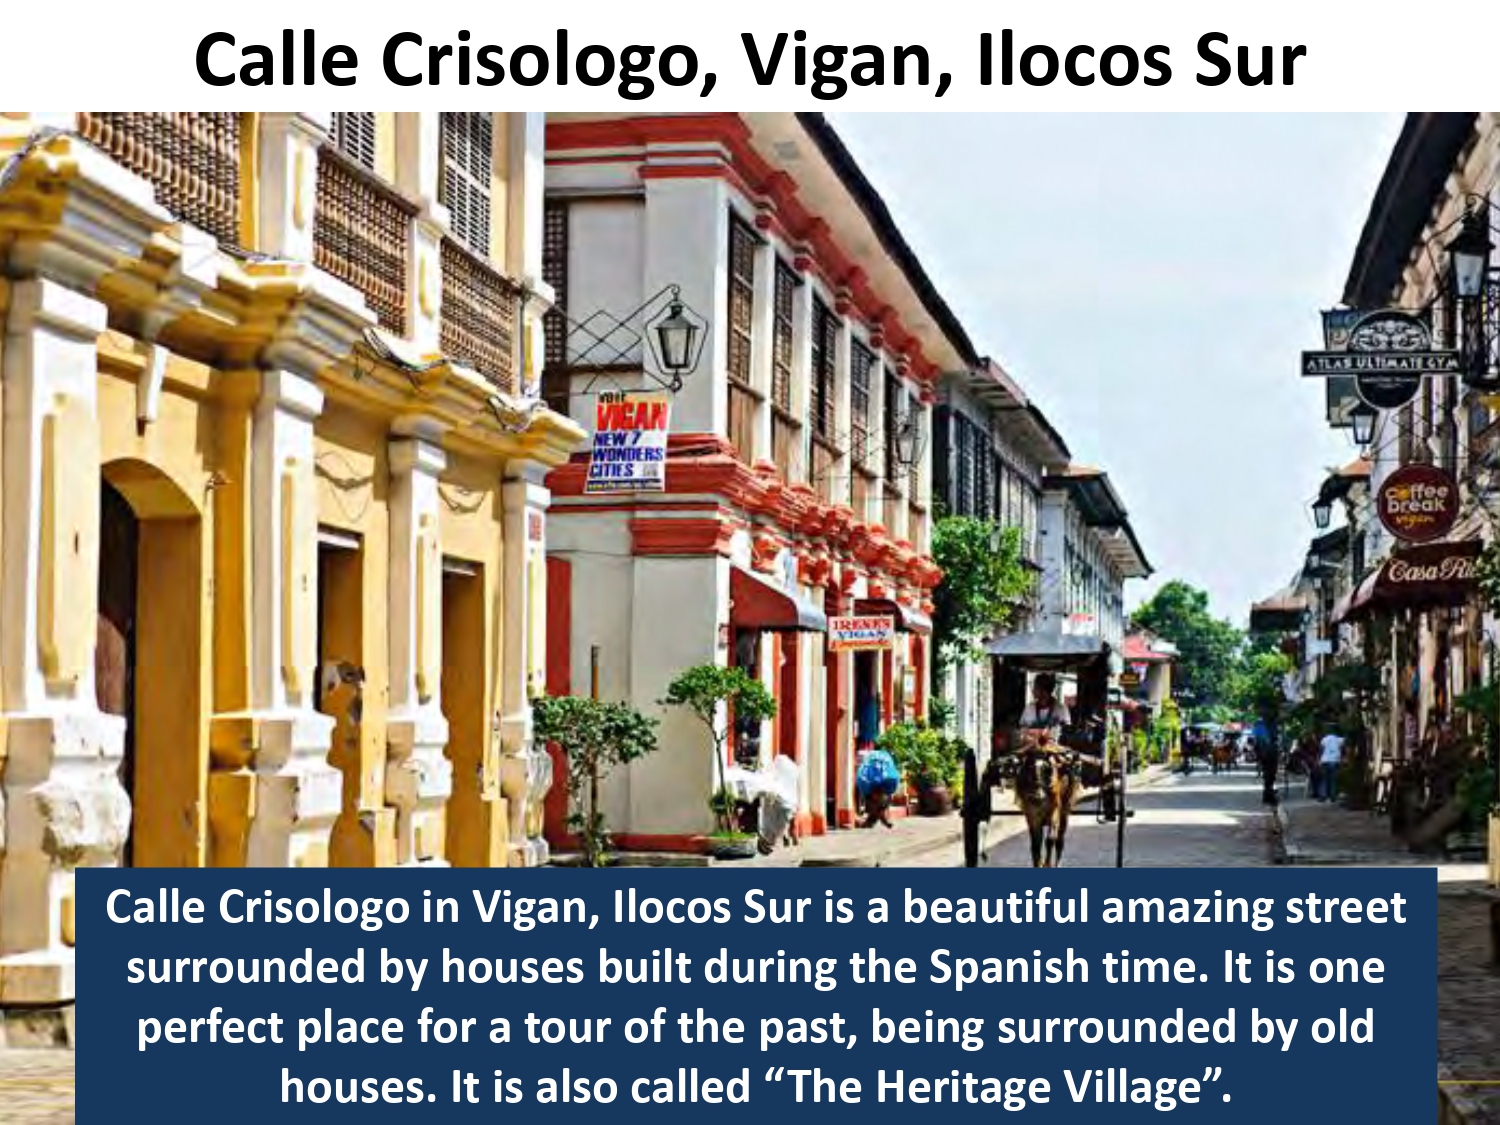 Calle Crisologo in Vigan, Ilocos Sur is a beautiful amazing street surrounded by houses built during the Spanish time. It is one perfect place for a tour of the past, being surrounded by old houses. It is also called “The Heritage Village”.